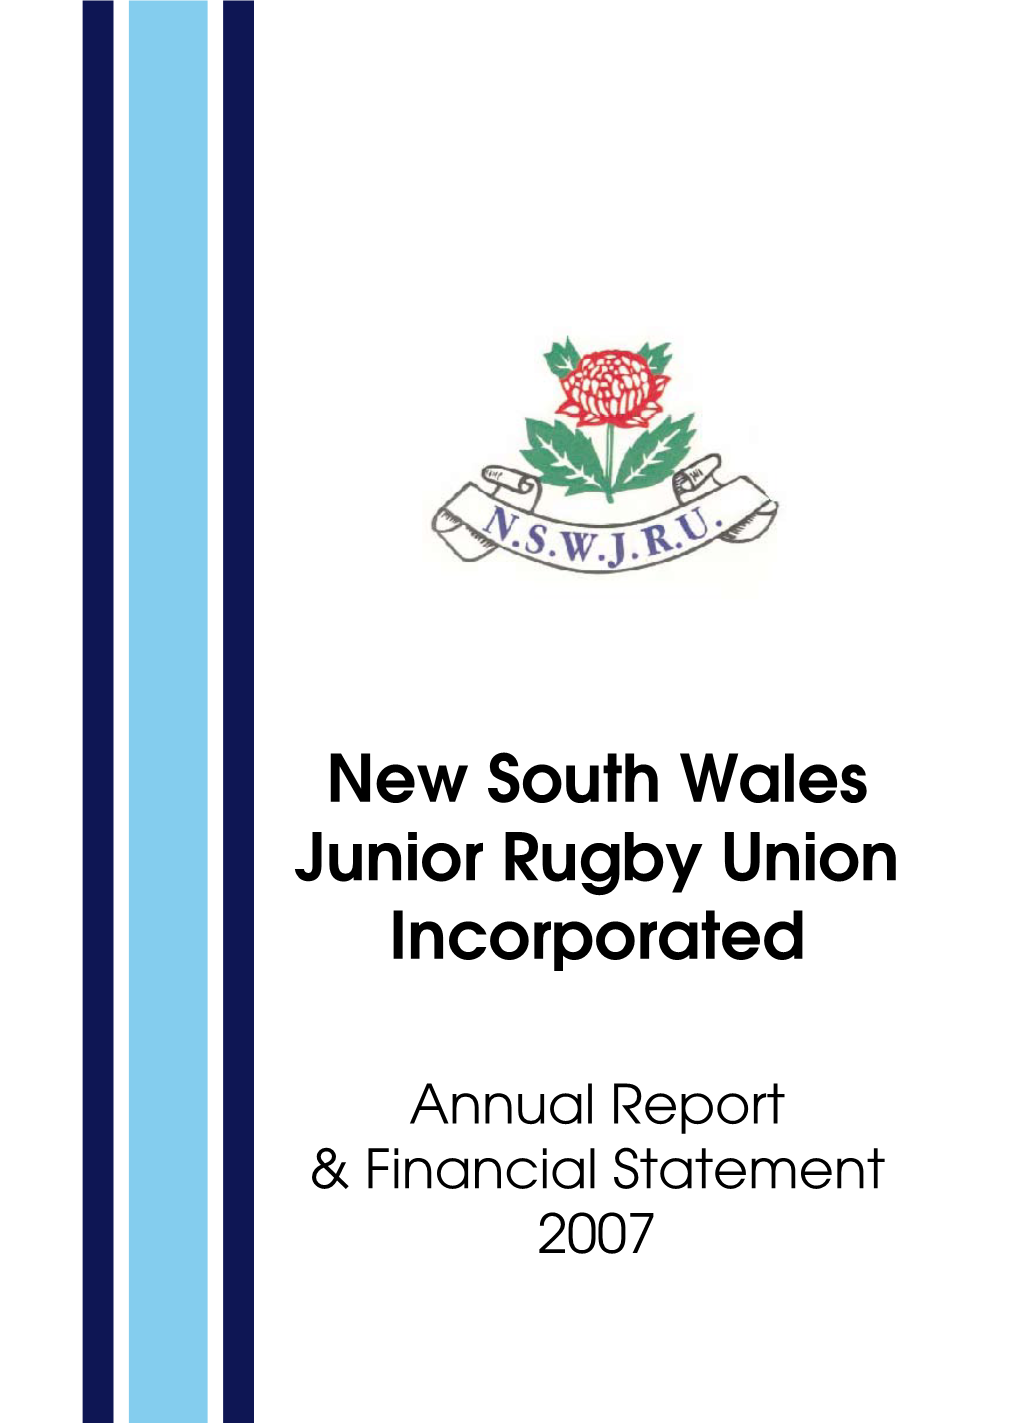 New South Wales Junior Rugby Union Incorporated